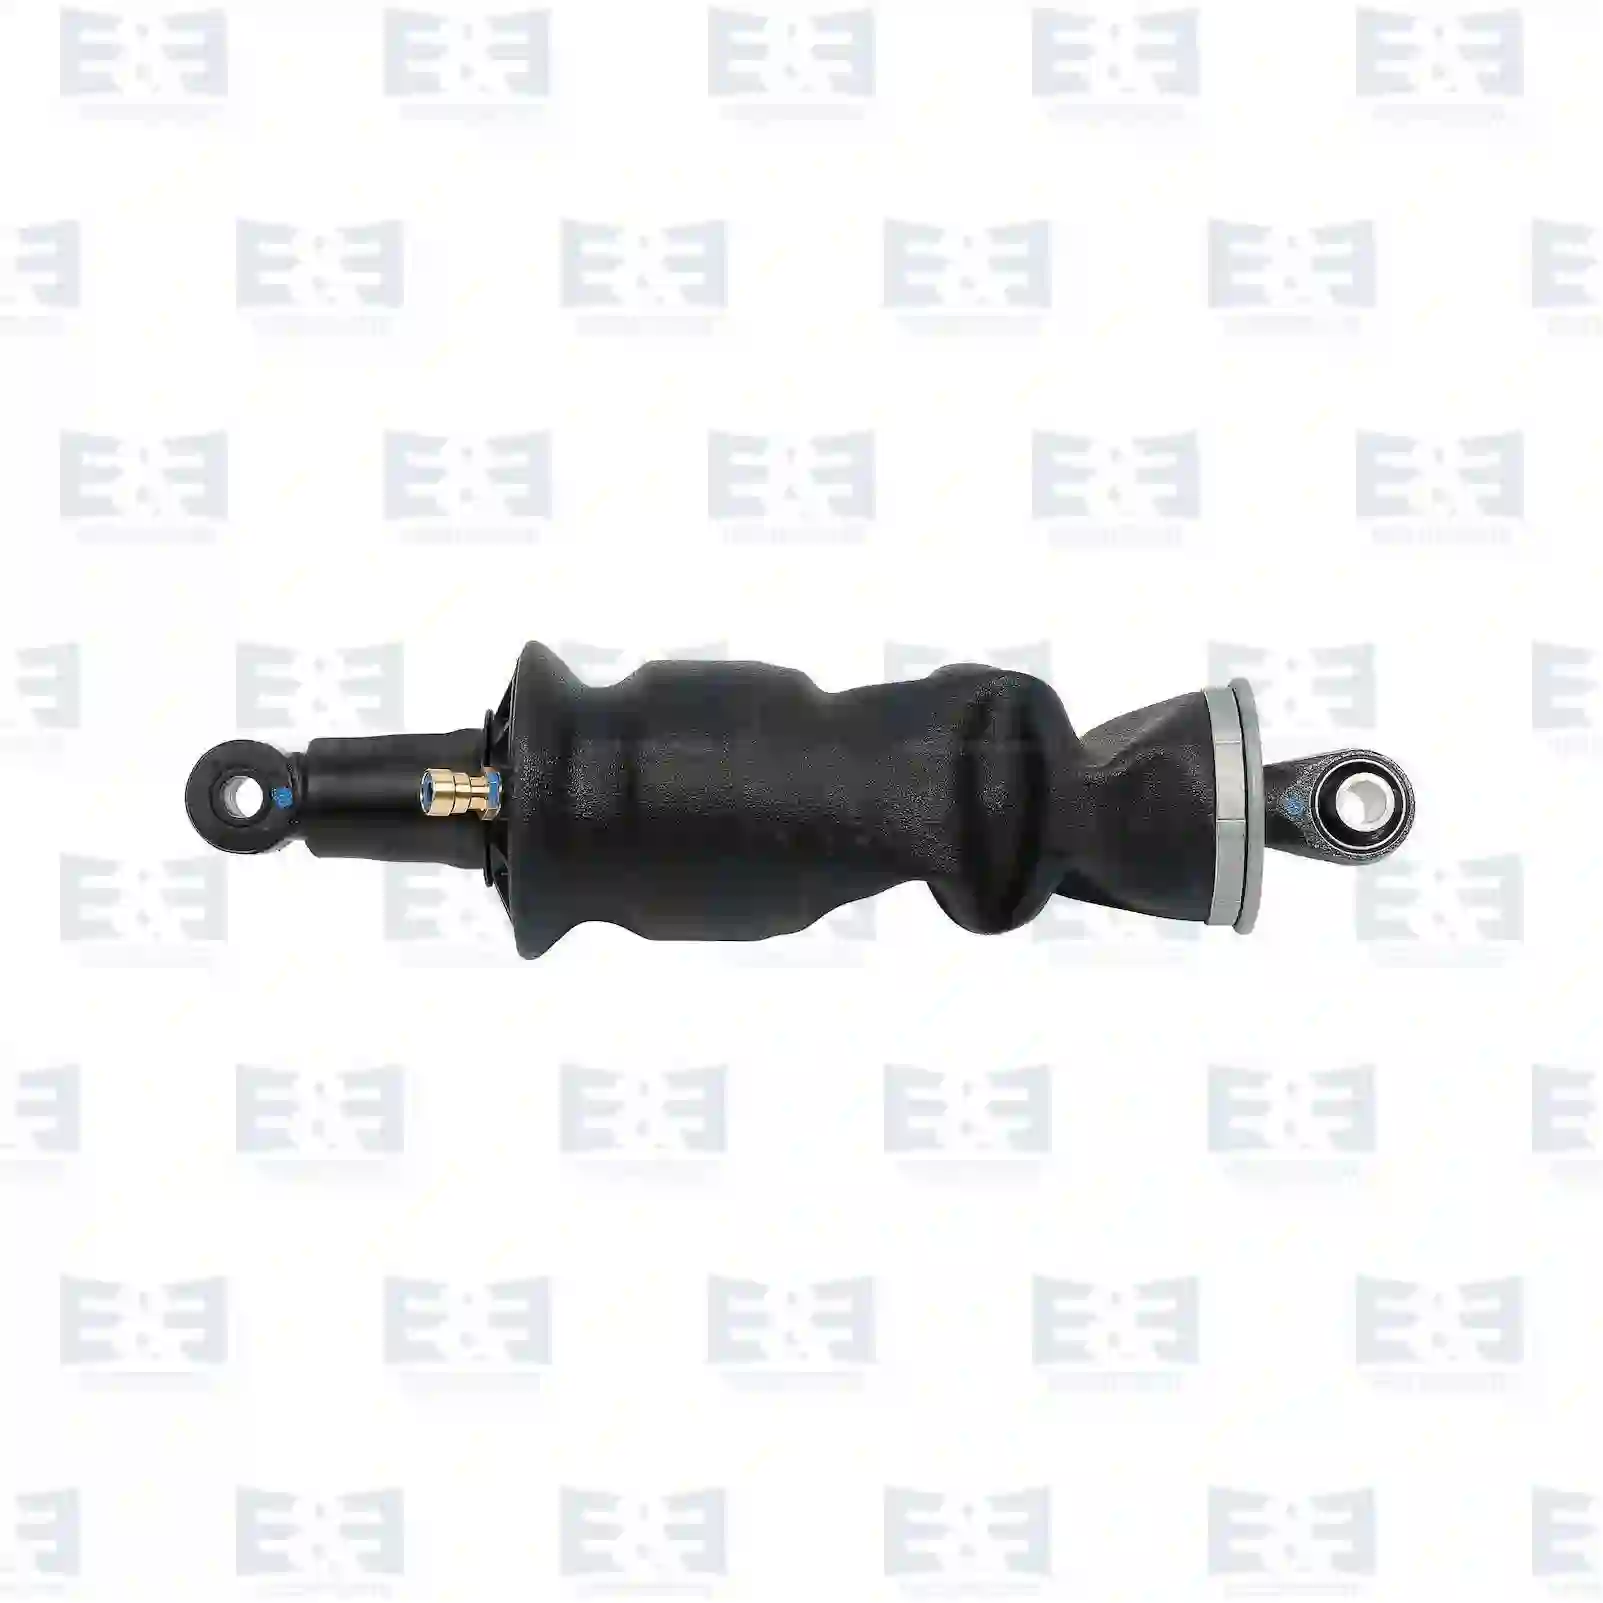 Cabin shock absorber, with air bellow, 2E2275326, 7421821027, 21171976, 22040666, ||  2E2275326 E&E Truck Spare Parts | Truck Spare Parts, Auotomotive Spare Parts Cabin shock absorber, with air bellow, 2E2275326, 7421821027, 21171976, 22040666, ||  2E2275326 E&E Truck Spare Parts | Truck Spare Parts, Auotomotive Spare Parts